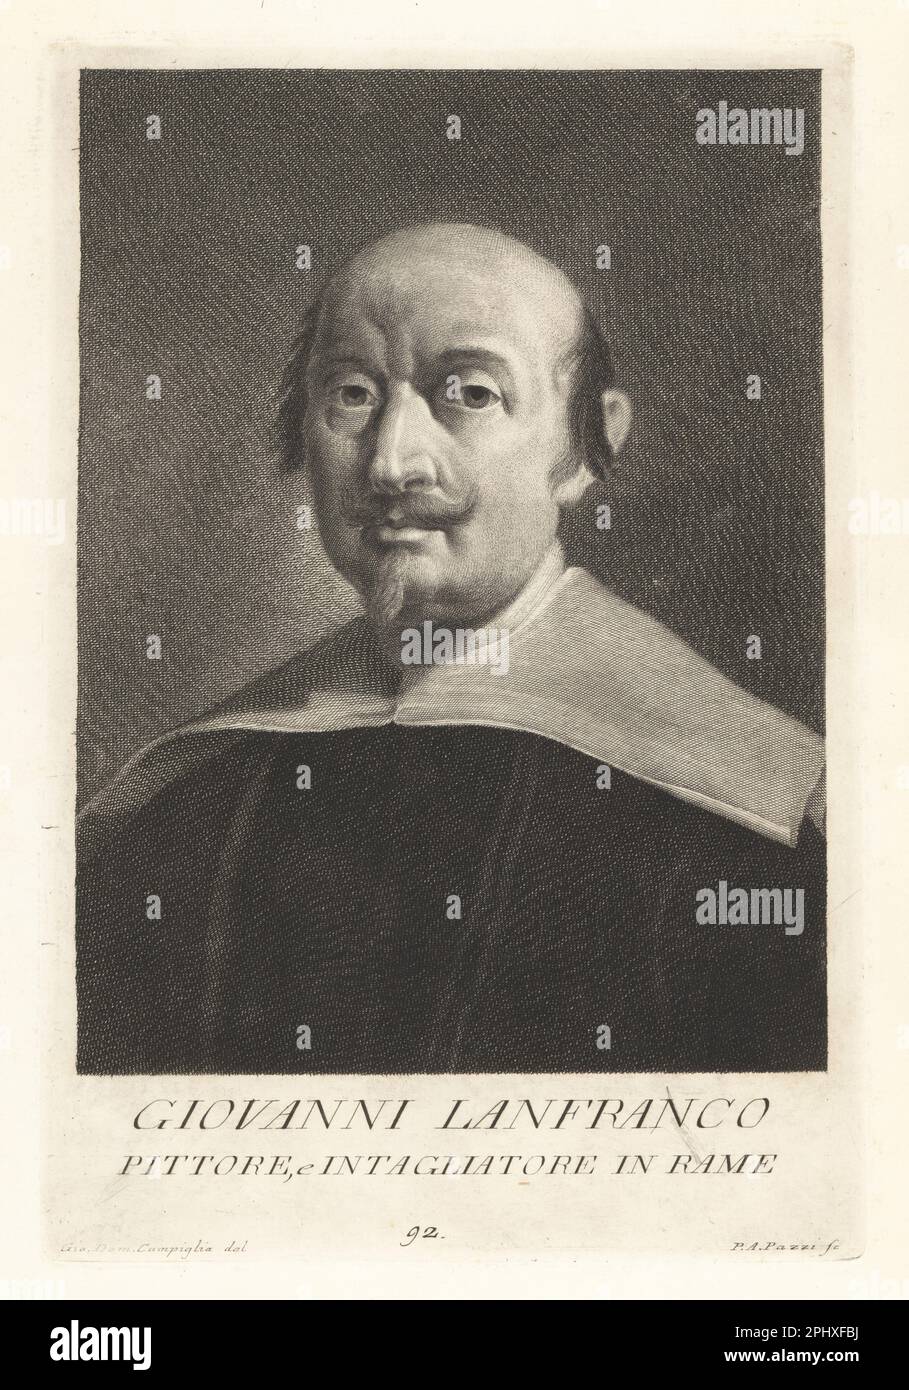 Giovanni Lanfranco, Italian painter and engraver of the Baroque period, 1581-1647. Also known as Cavaliere Giovanni di Stefano, painted religious subjects in Rome for Cardinal Sannese and Pope Paul V. Pittore e Intagliatore in rame. Copperplate engraving by Pietro Antonio Pazzi after Giovanni Domenico Campiglia after a self portrait by the artist from Francesco Moucke's Museo Florentino (Museum Florentinum), Serie di Ritratti de Pittori (Series of Portraits of Painters) stamperia Mouckiana, Florence, 1752-62. Stock Photo